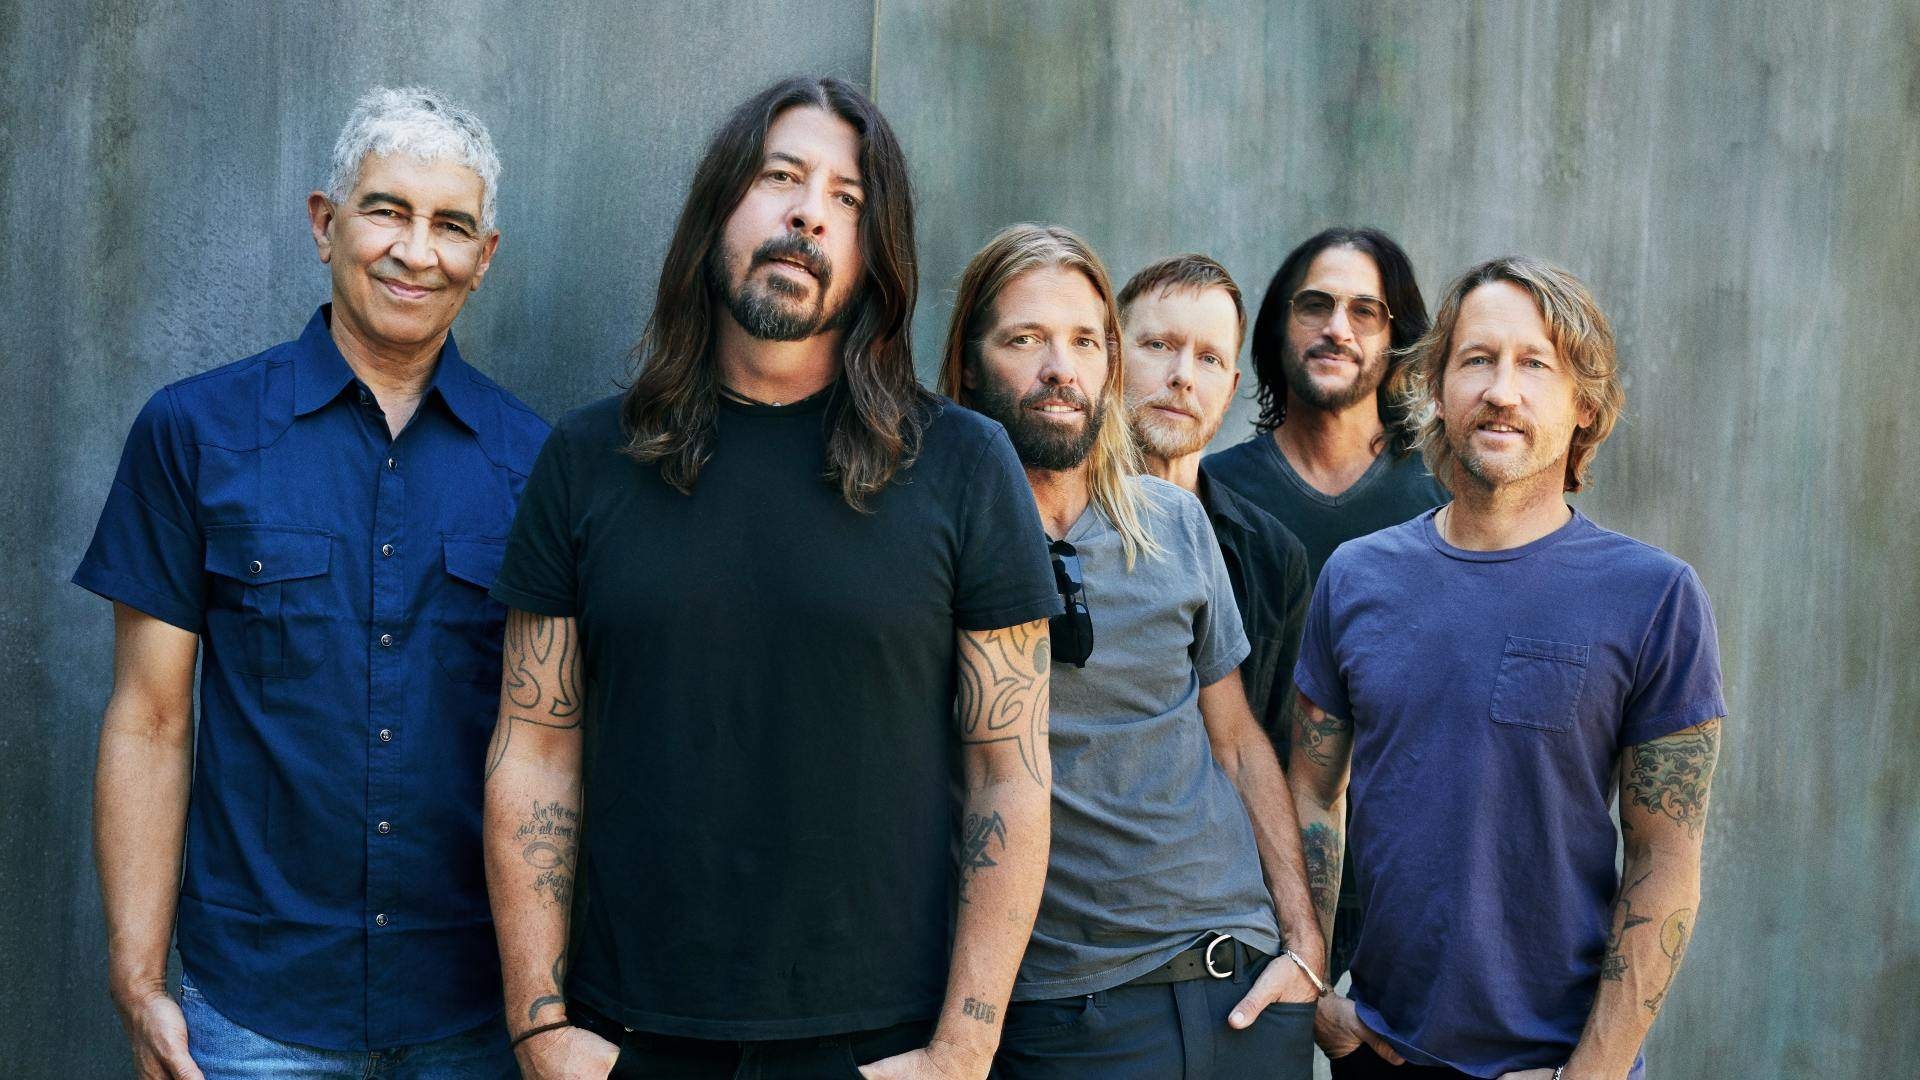 Foo Fighters: The band's tenth album, Medicine at Midnight, the last to feature Hawkins. 1920x1080 Full HD Wallpaper.